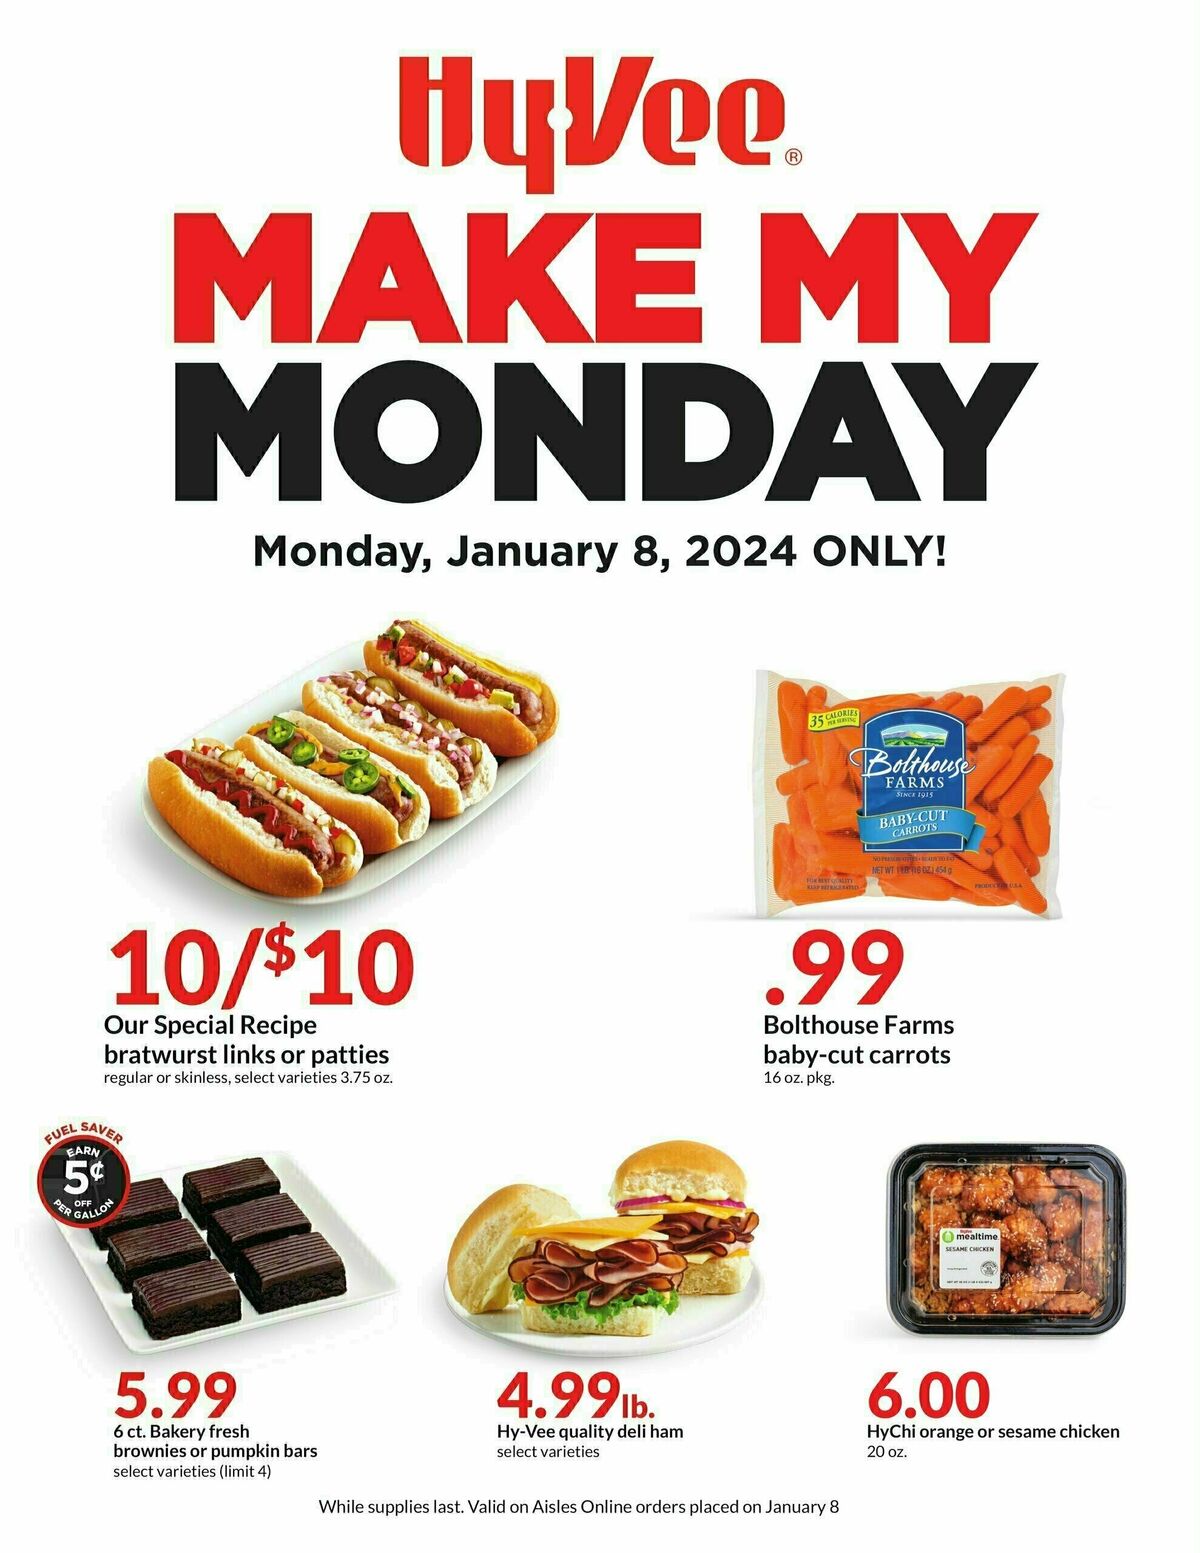 Hy-Vee Make My Monday Weekly Ad from January 8